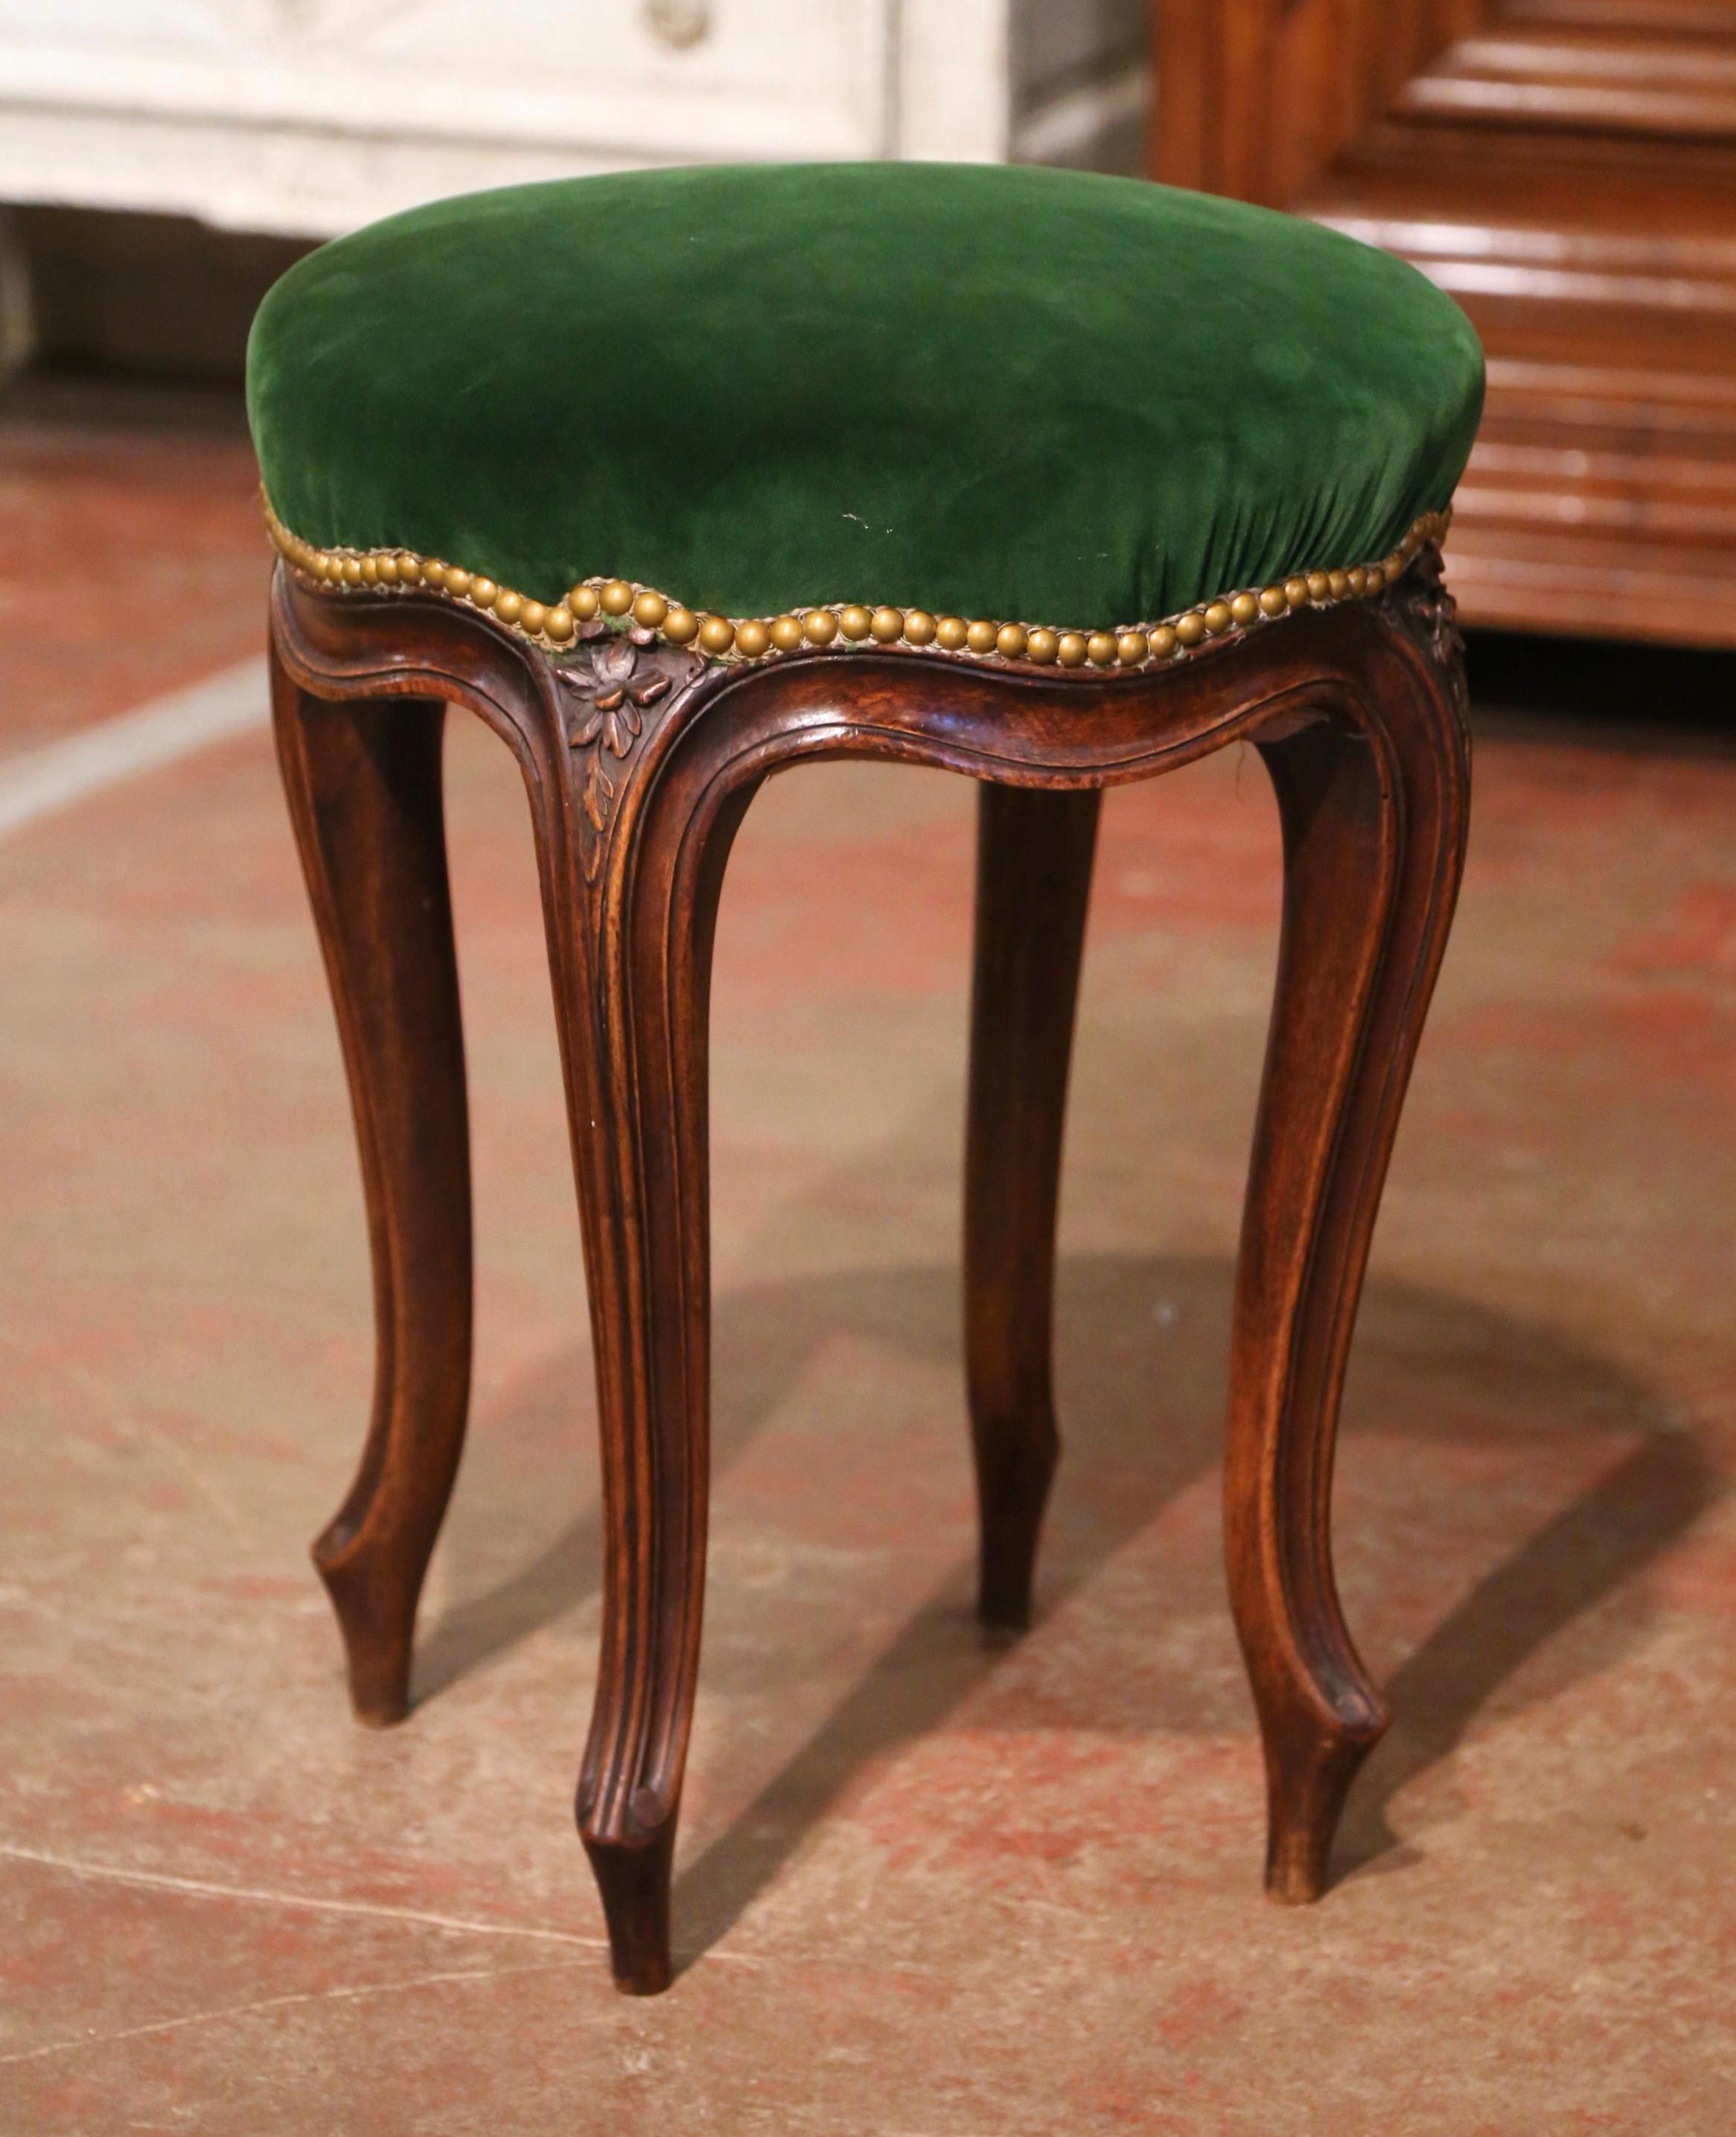 19th Century French Louis XV Carved Walnut Stool with Green Velvet In Excellent Condition For Sale In Dallas, TX